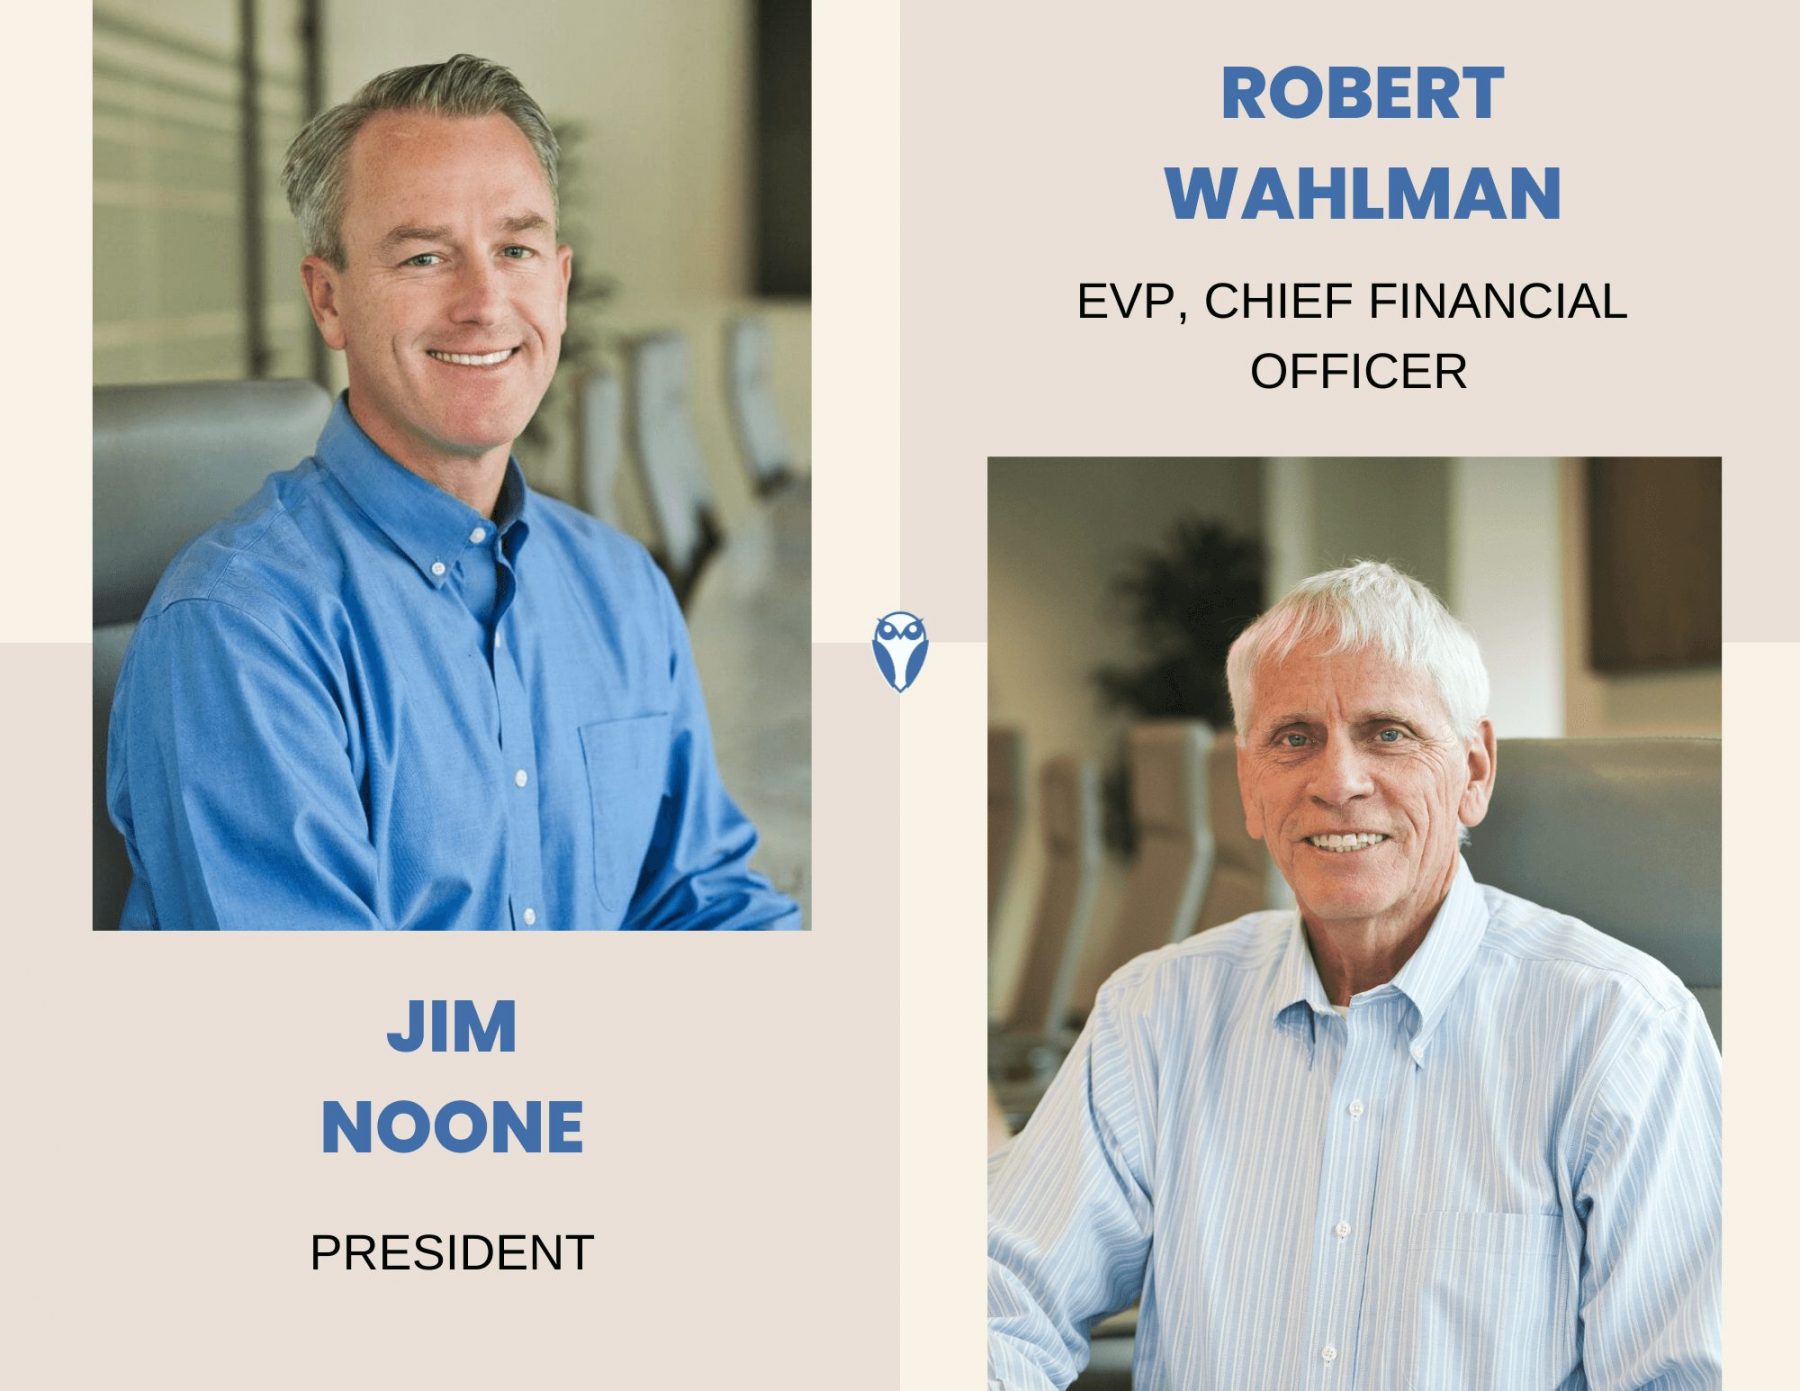 FinWise Bancorp Appoints Jim Noone and Hires Robert Wahlman